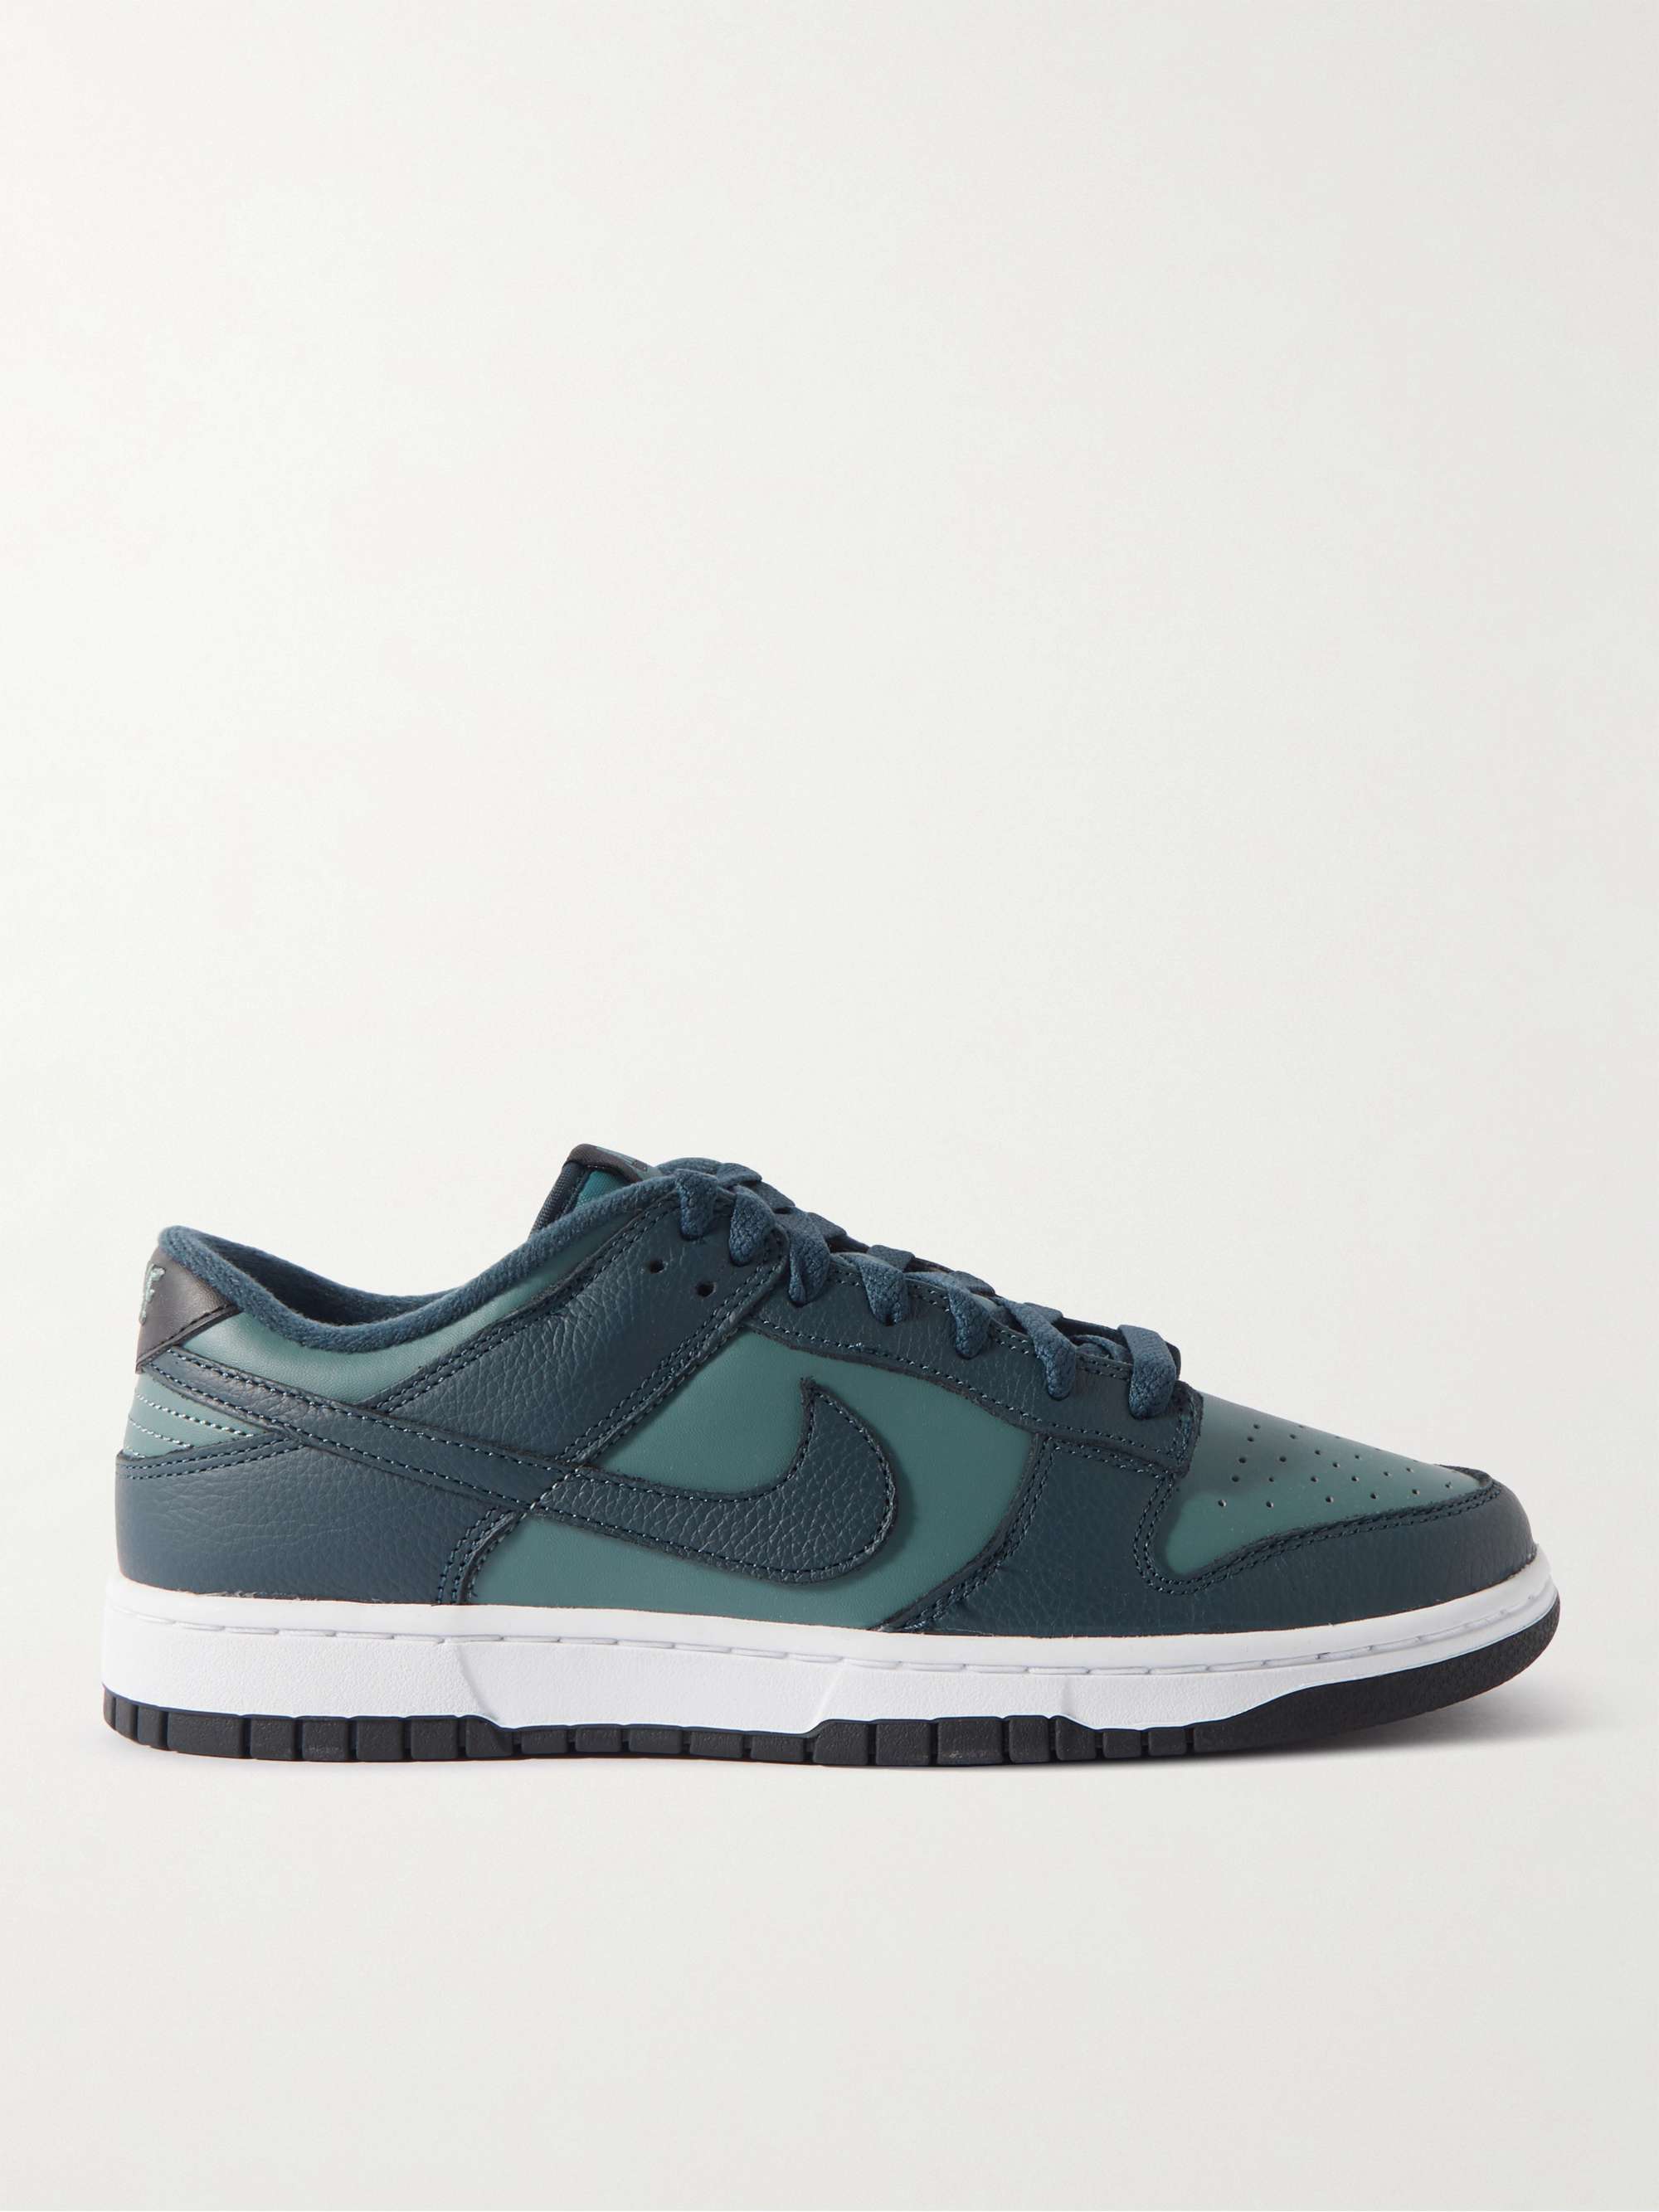 NIKE Dunk Low Leather Sneakers | MR PORTER